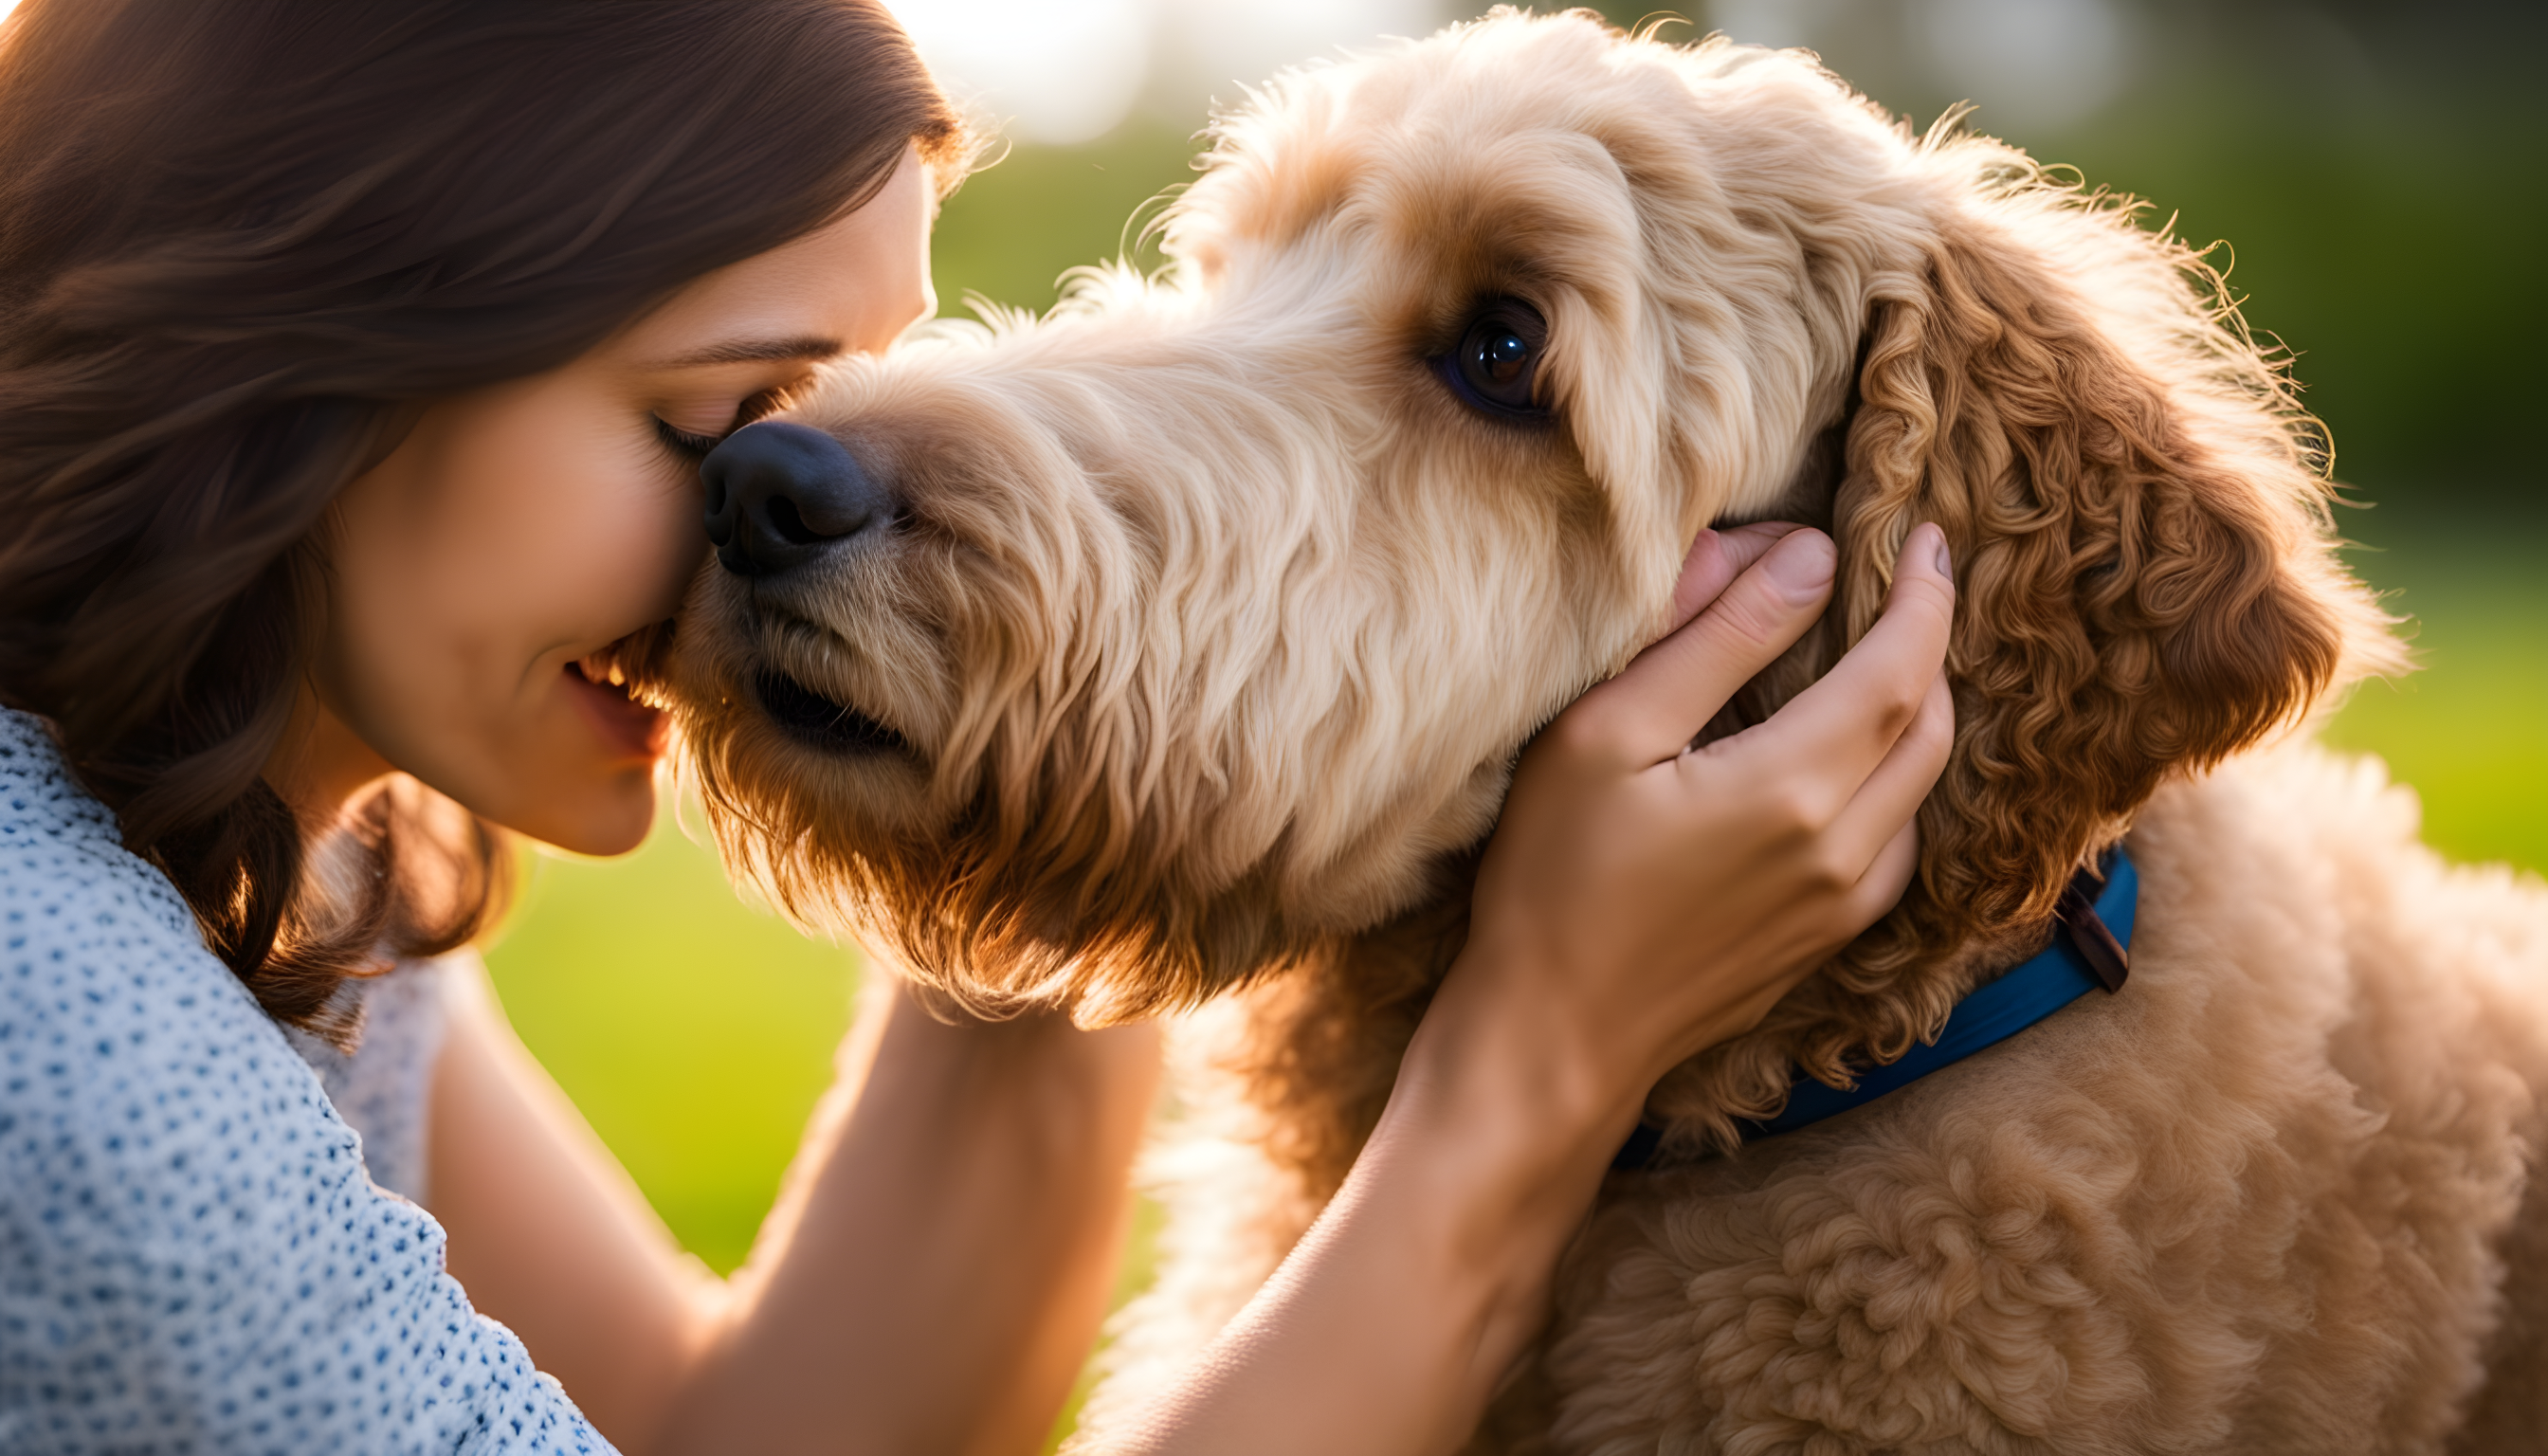 A Labradoodle and its owner sharing a heartfelt moment, eyes locked, paws and hands touching. The epitome of emotional bonding.